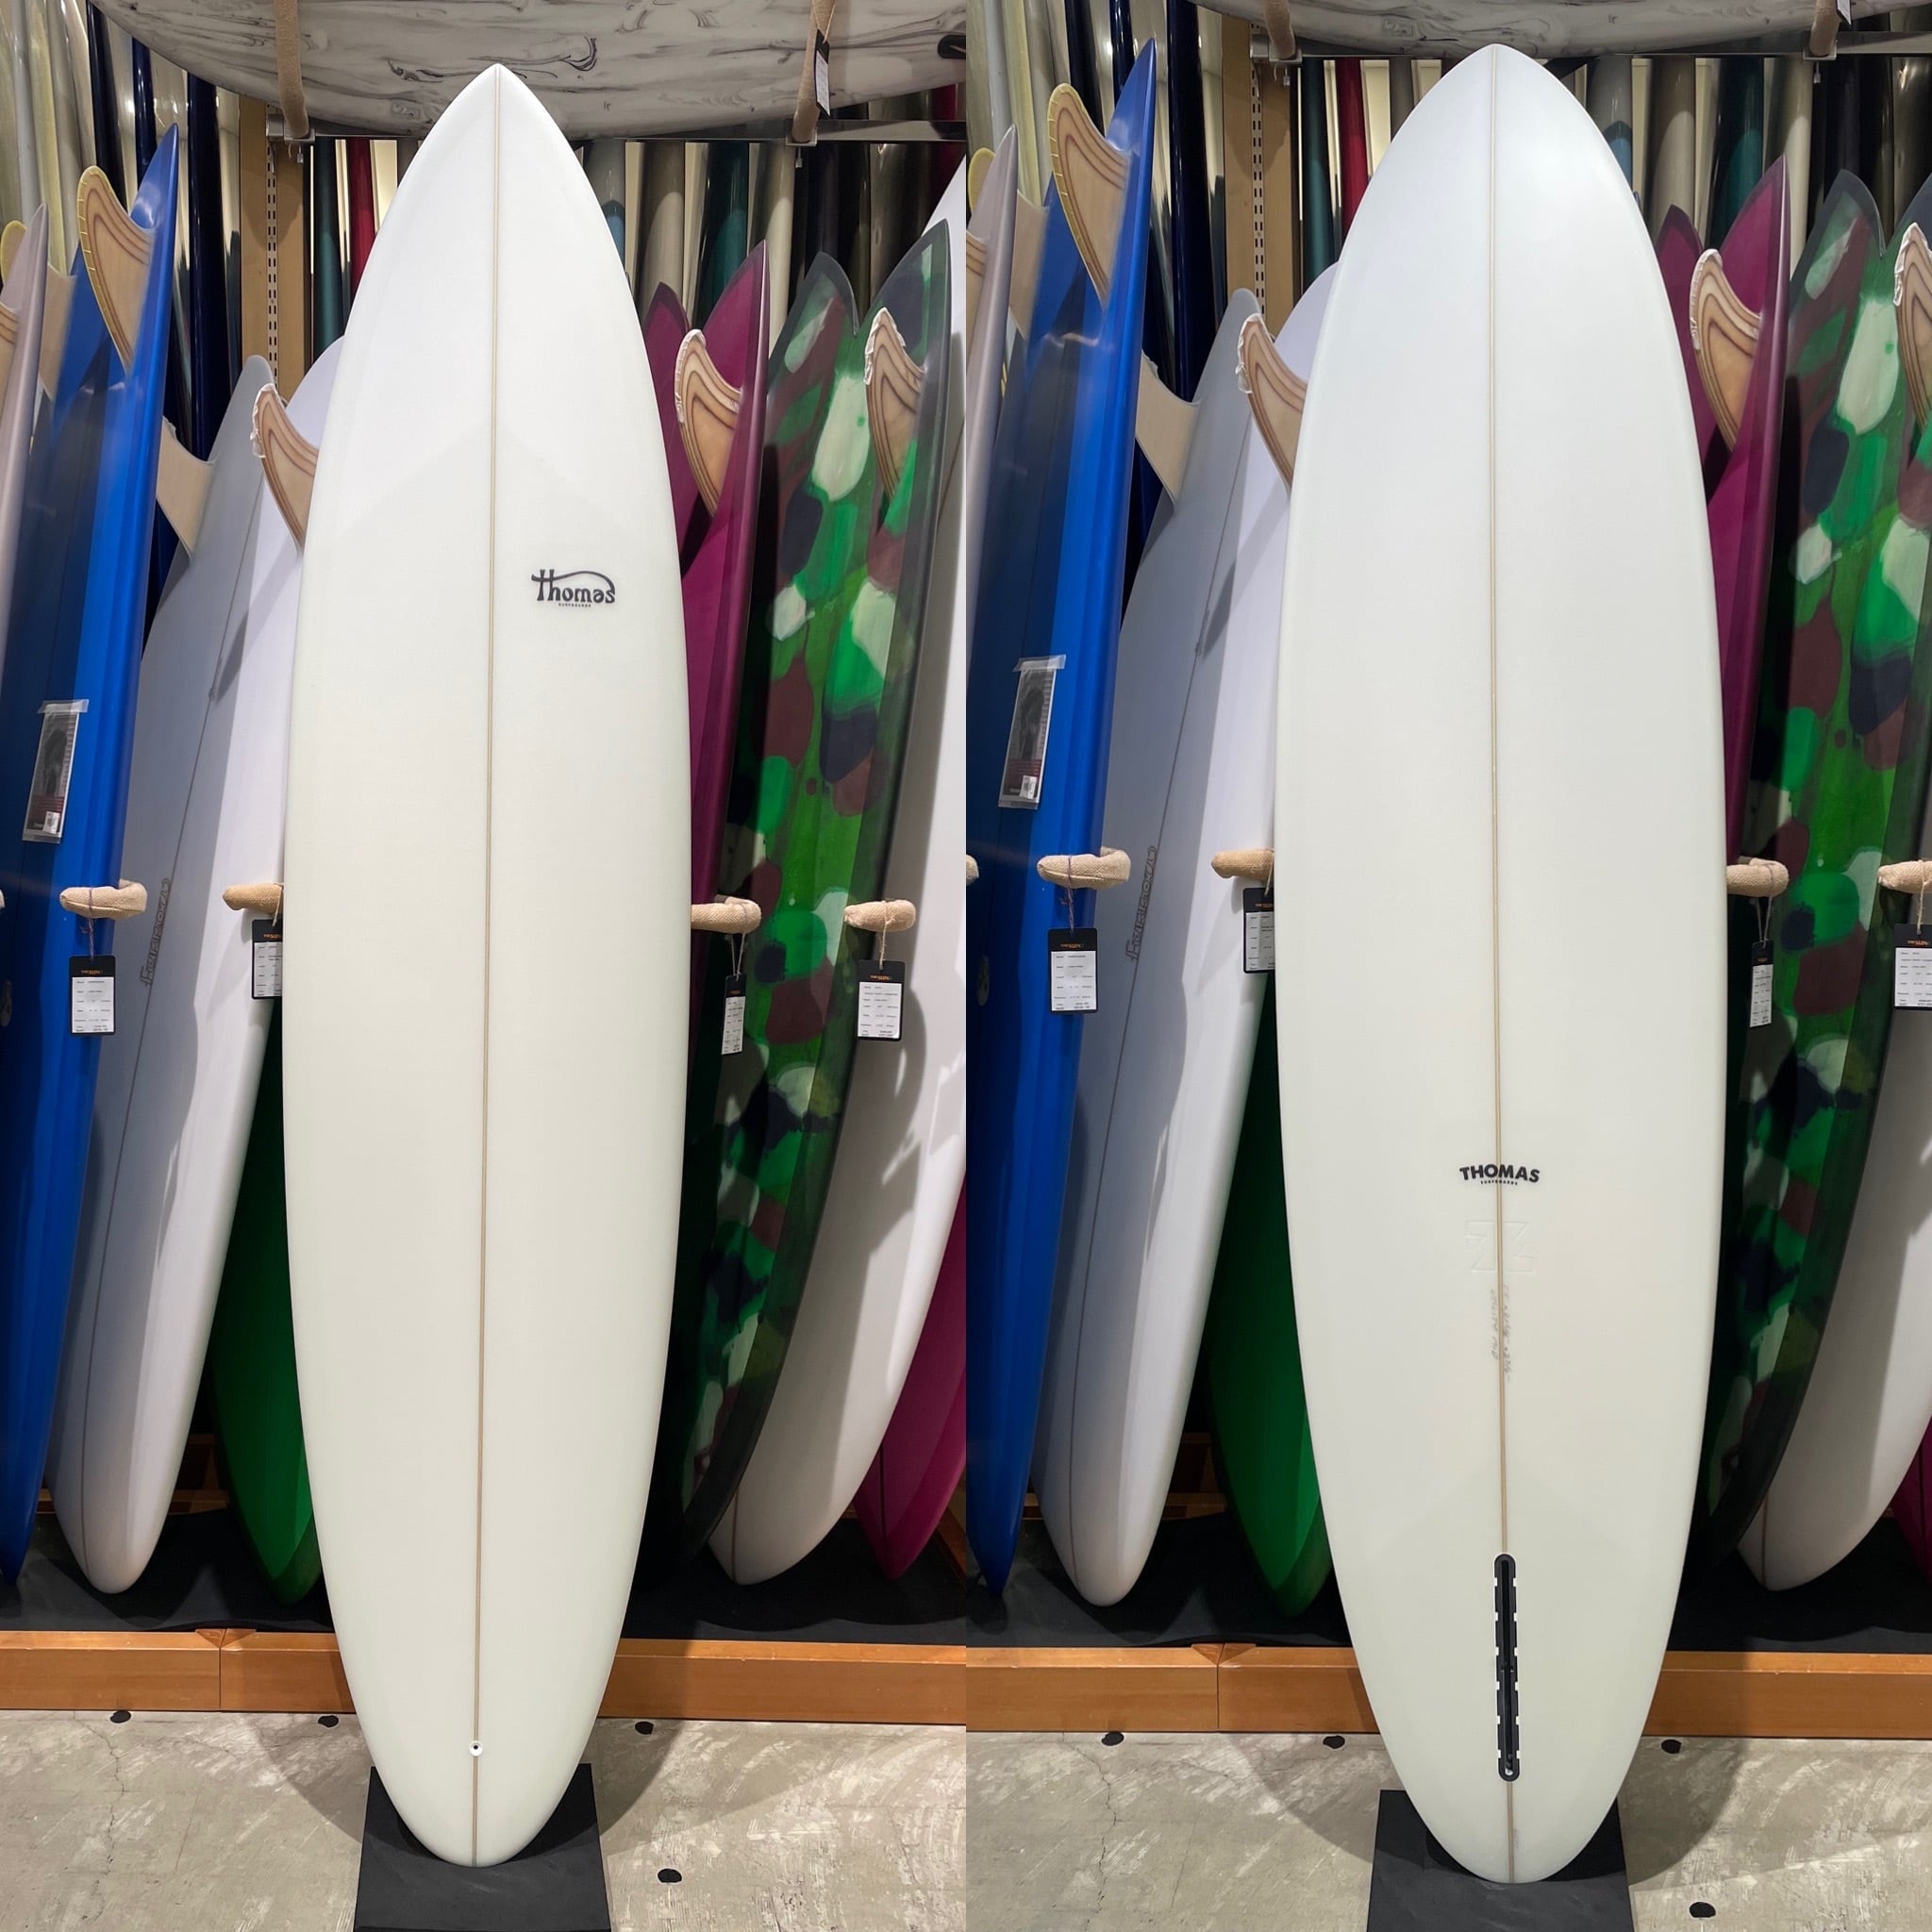 THOMAS SURFBOARDS | THE SUNS ONLINE STORE